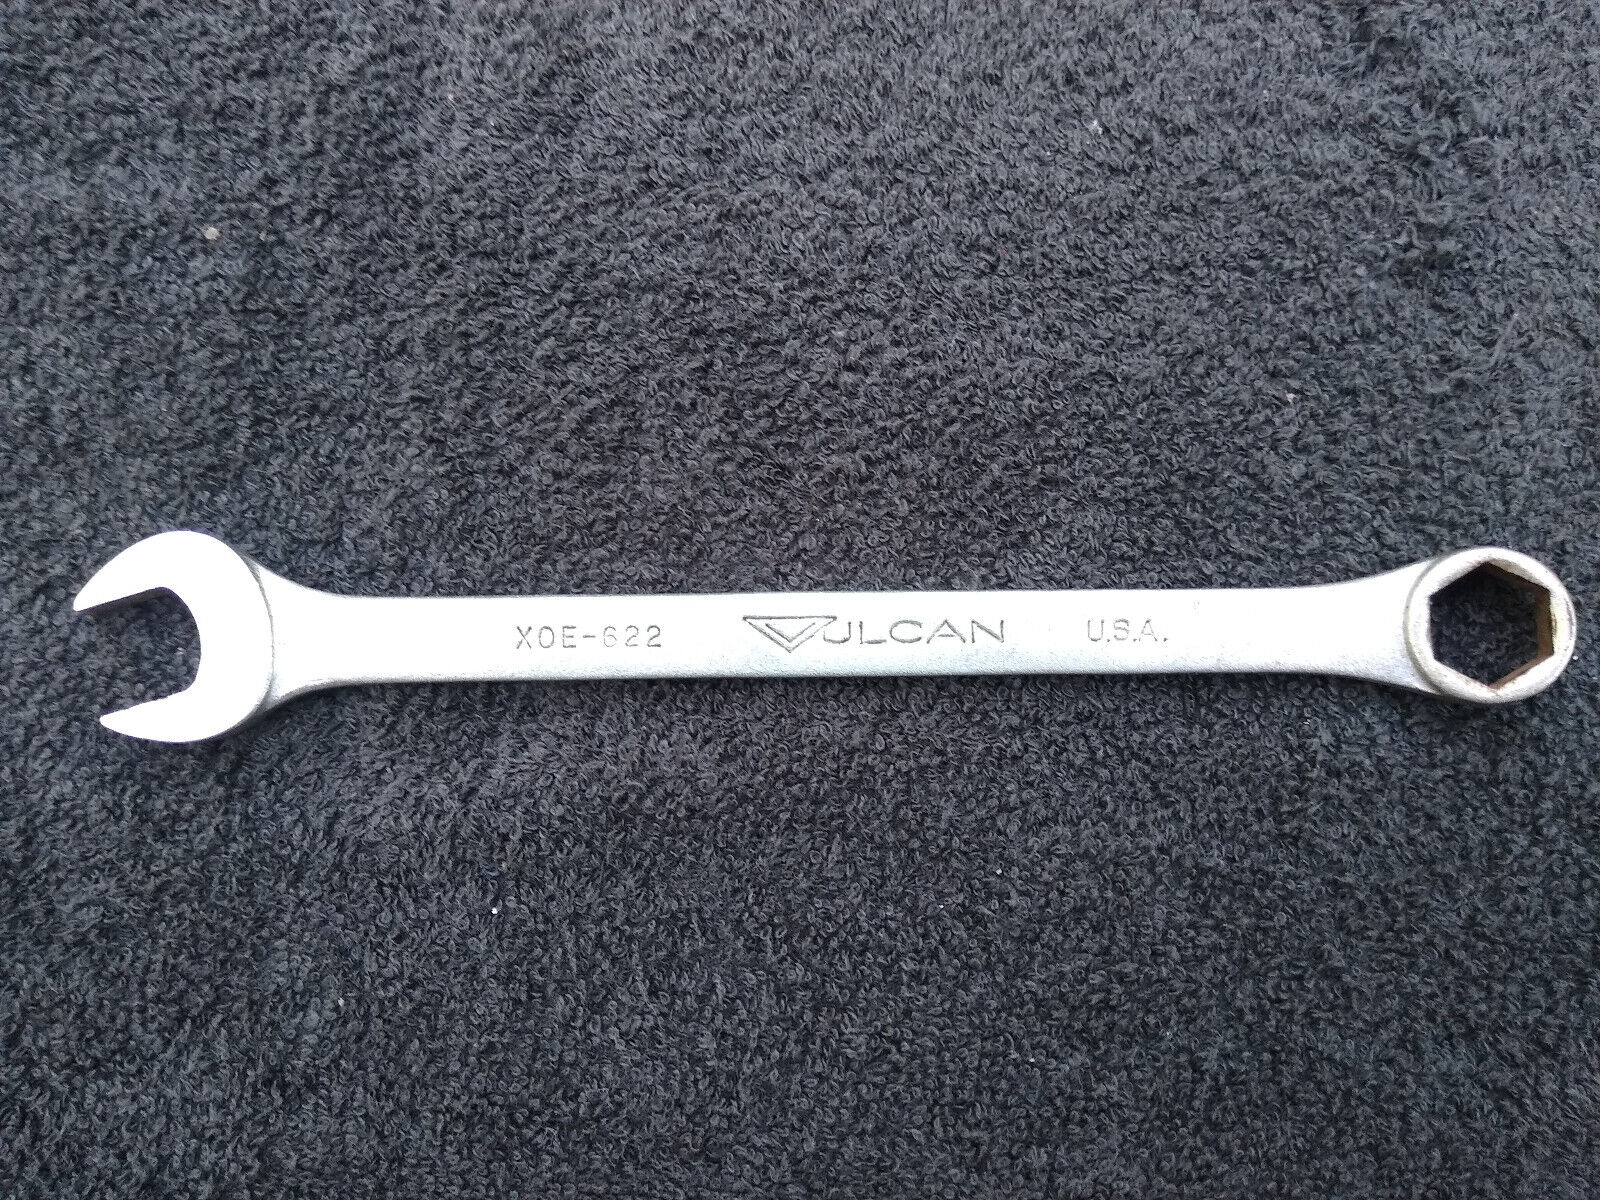 Vulcan XOE-622 Combination Wrench, 11/16-Inch Vintage